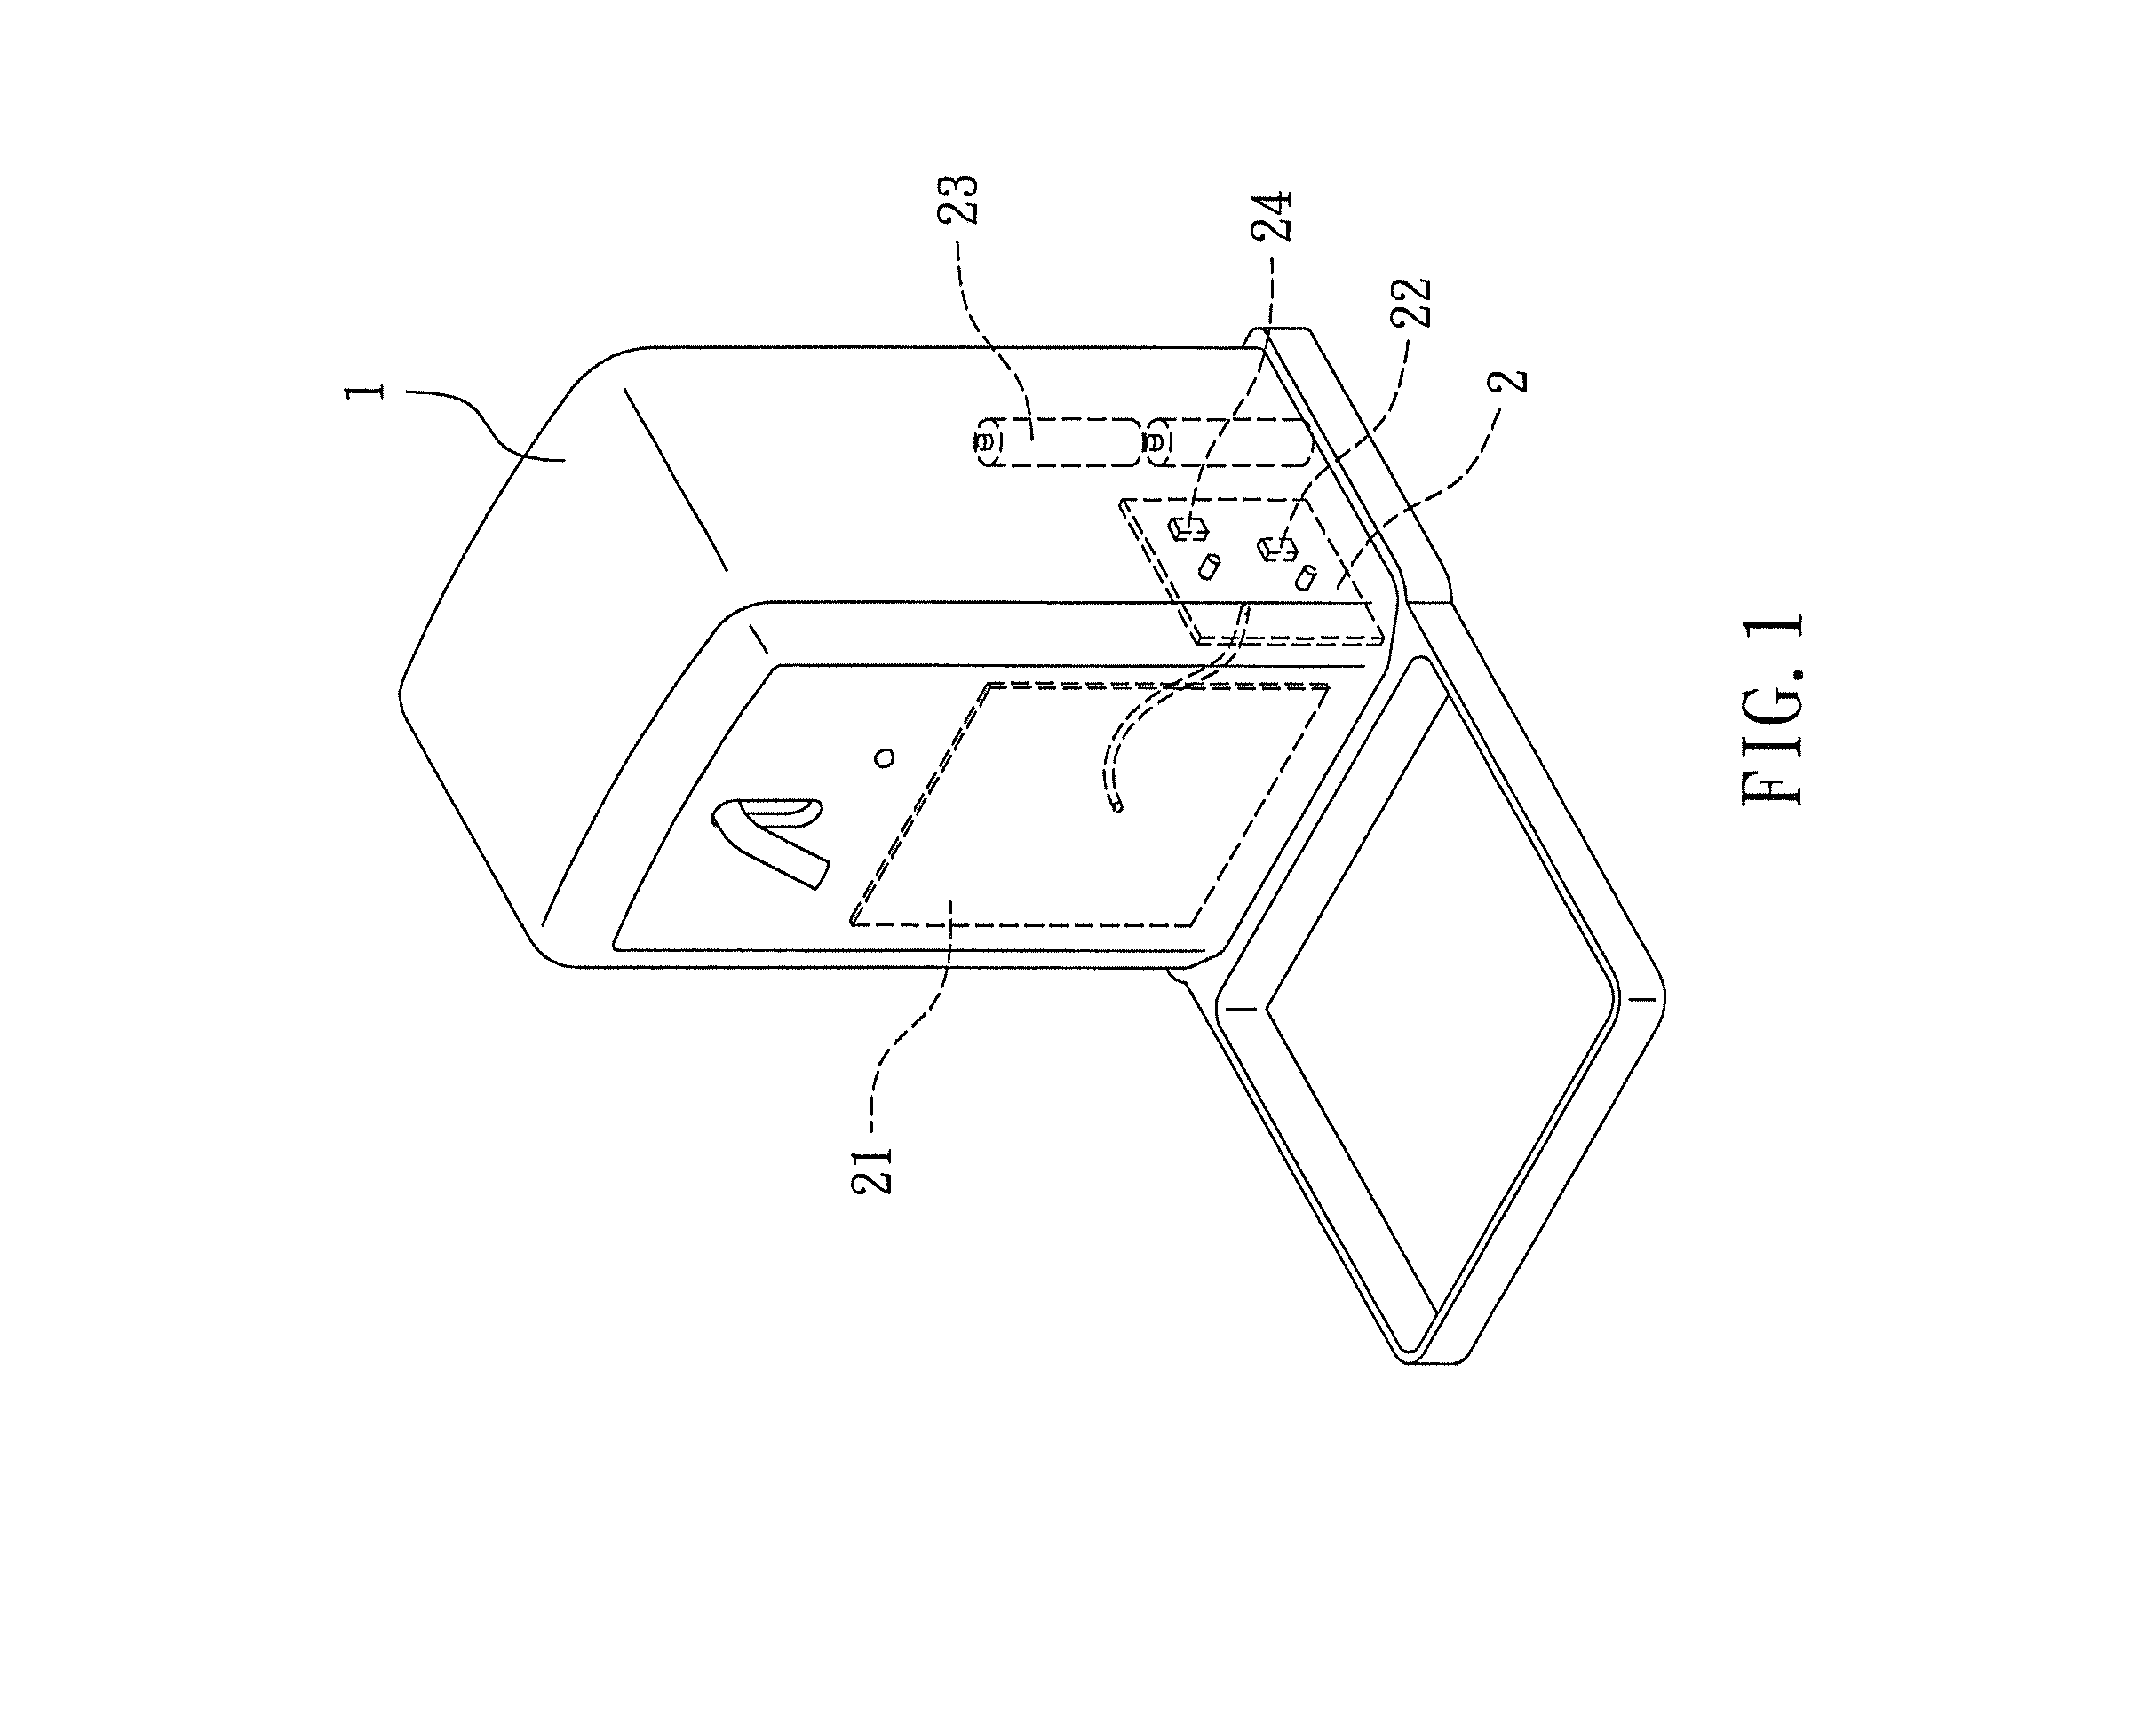 Self-contained apparatus/automatic door having a non-contact sensor switch assembly